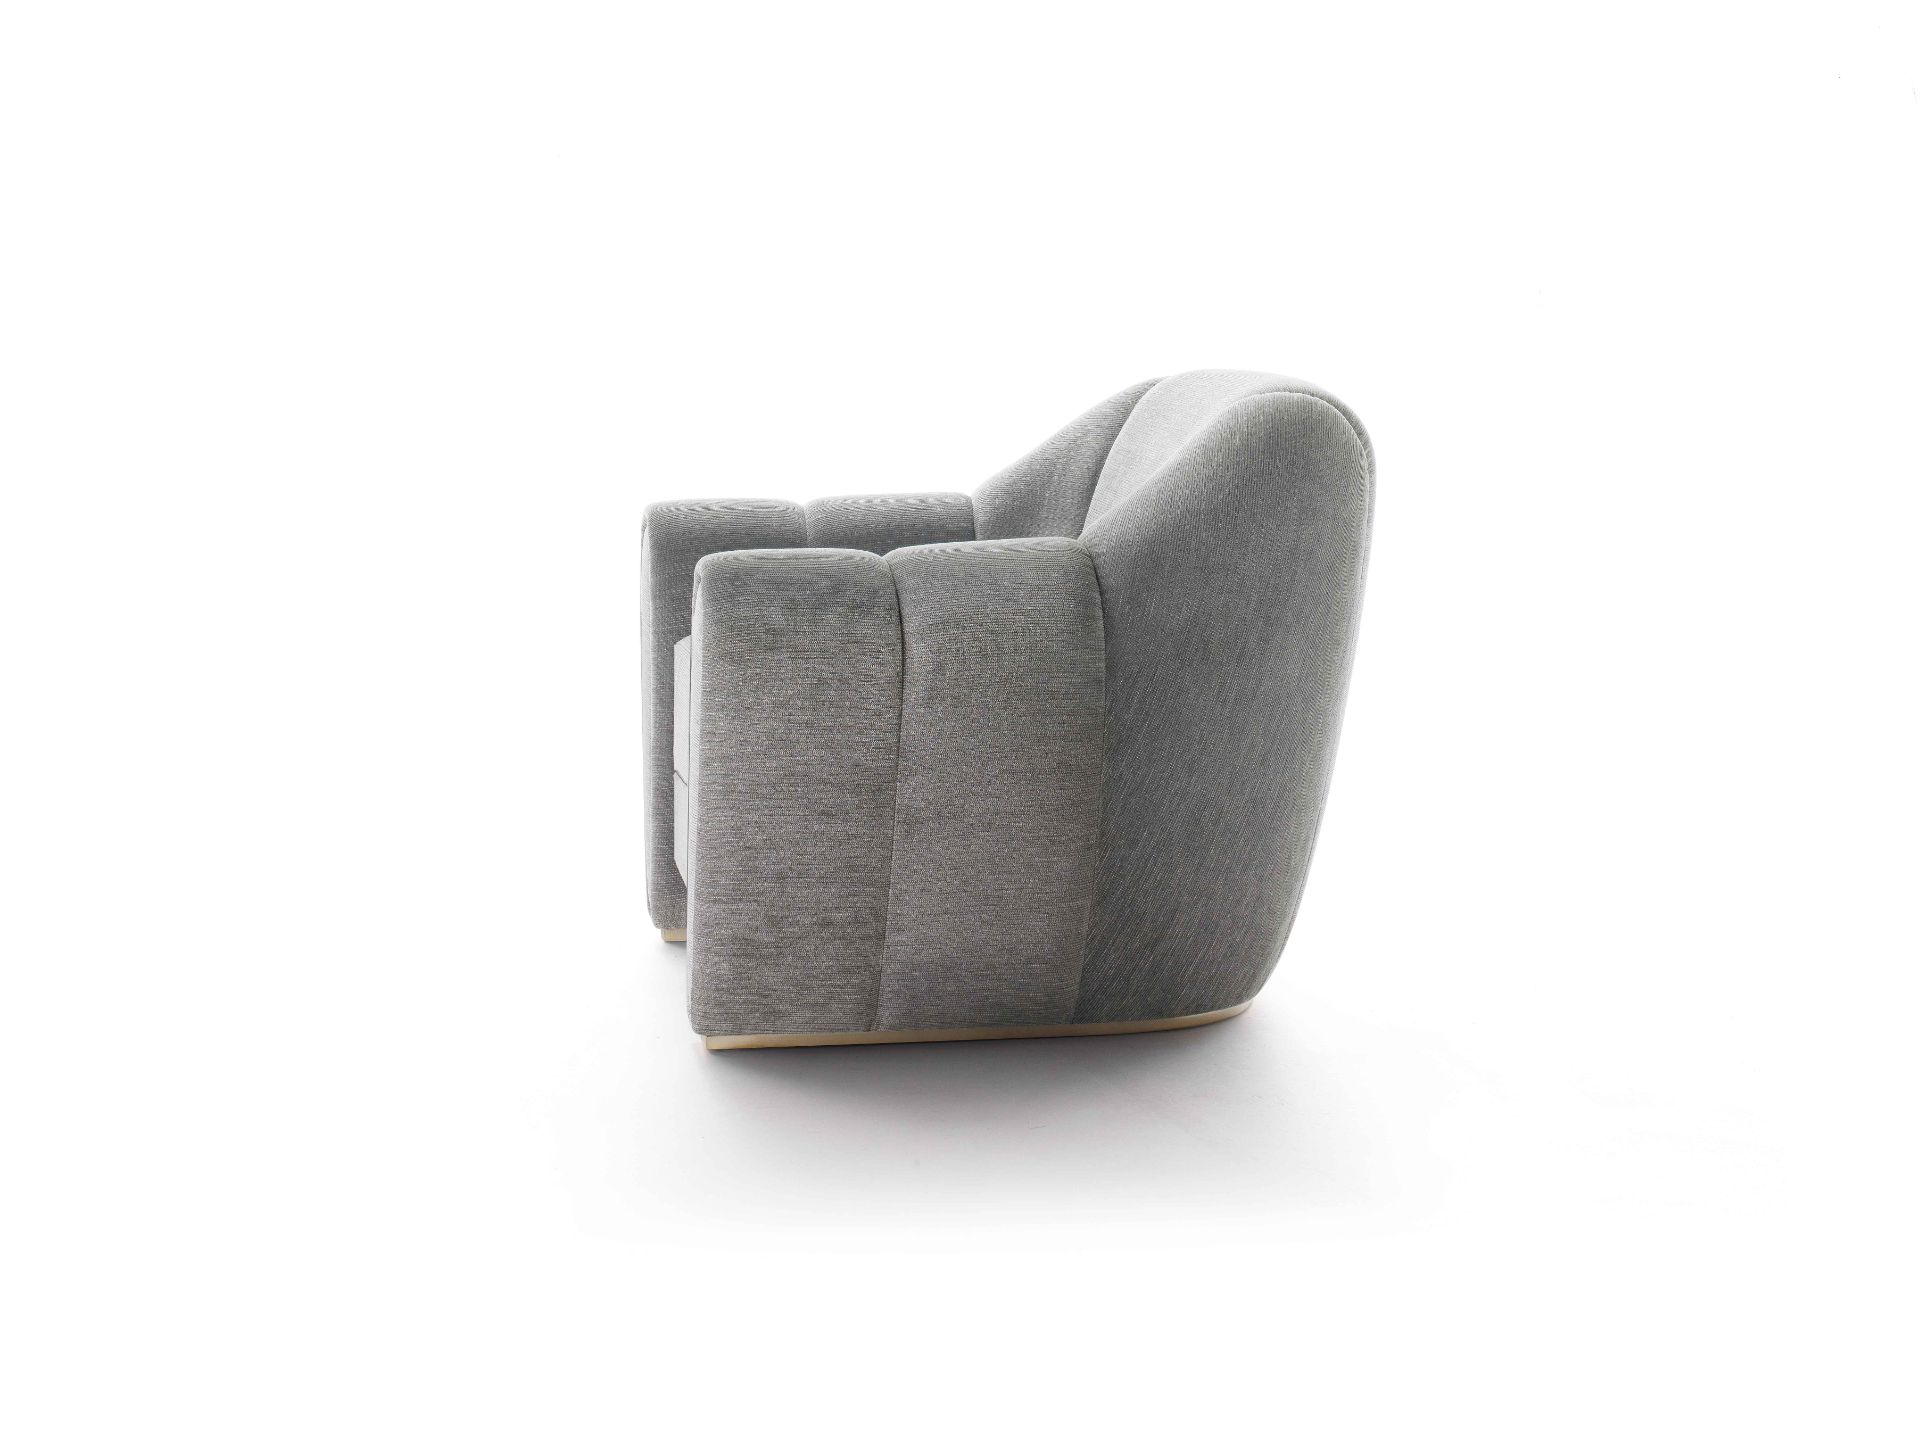 Fashion Affair Arm Chair by Telemaco for Malerba The Fashion Affair Arm Chair welcomes you and - Image 3 of 5